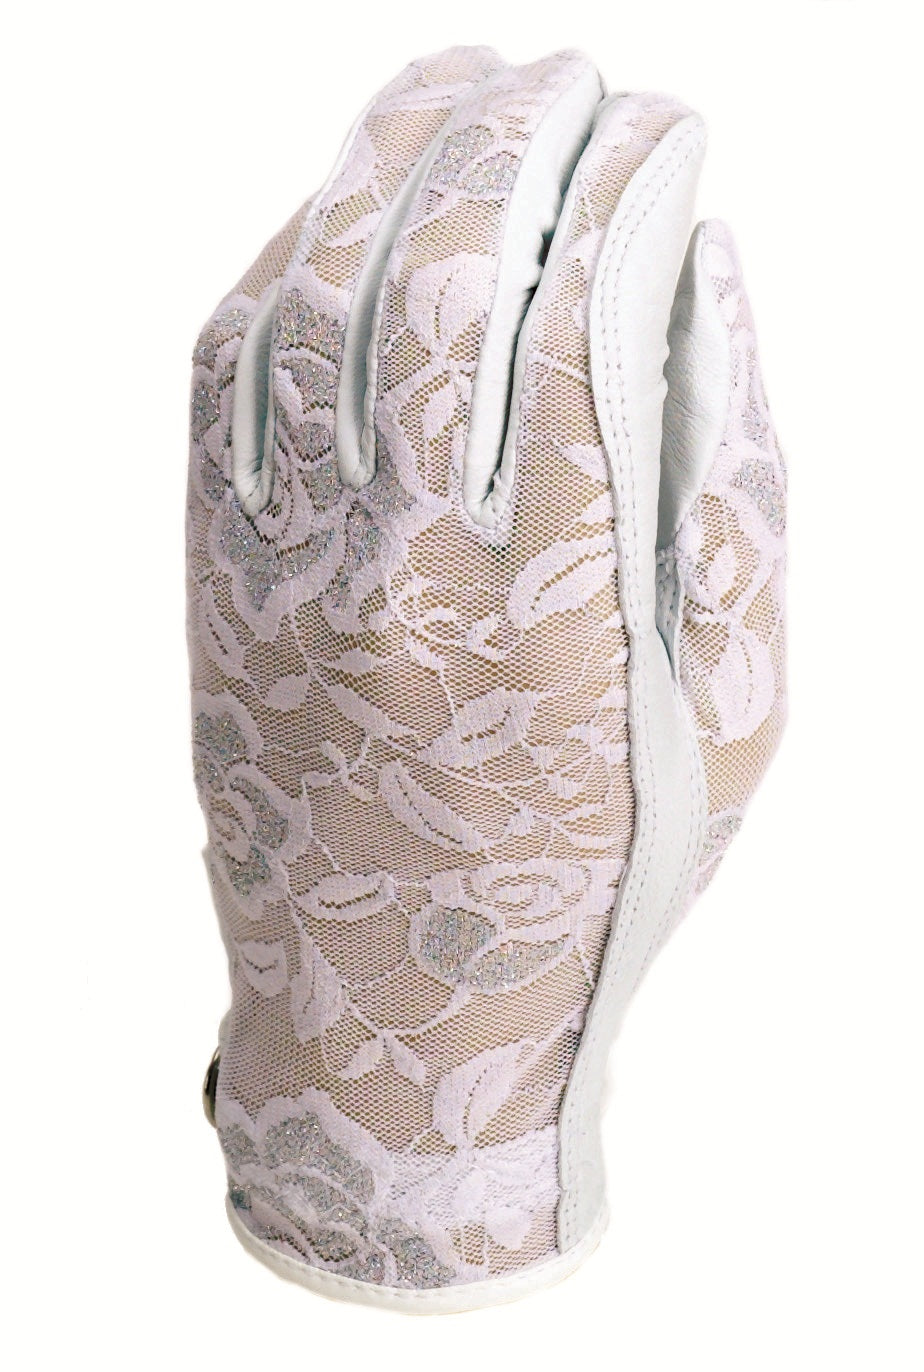 Evertan- White Lace Golf Glove (for LeftHand)